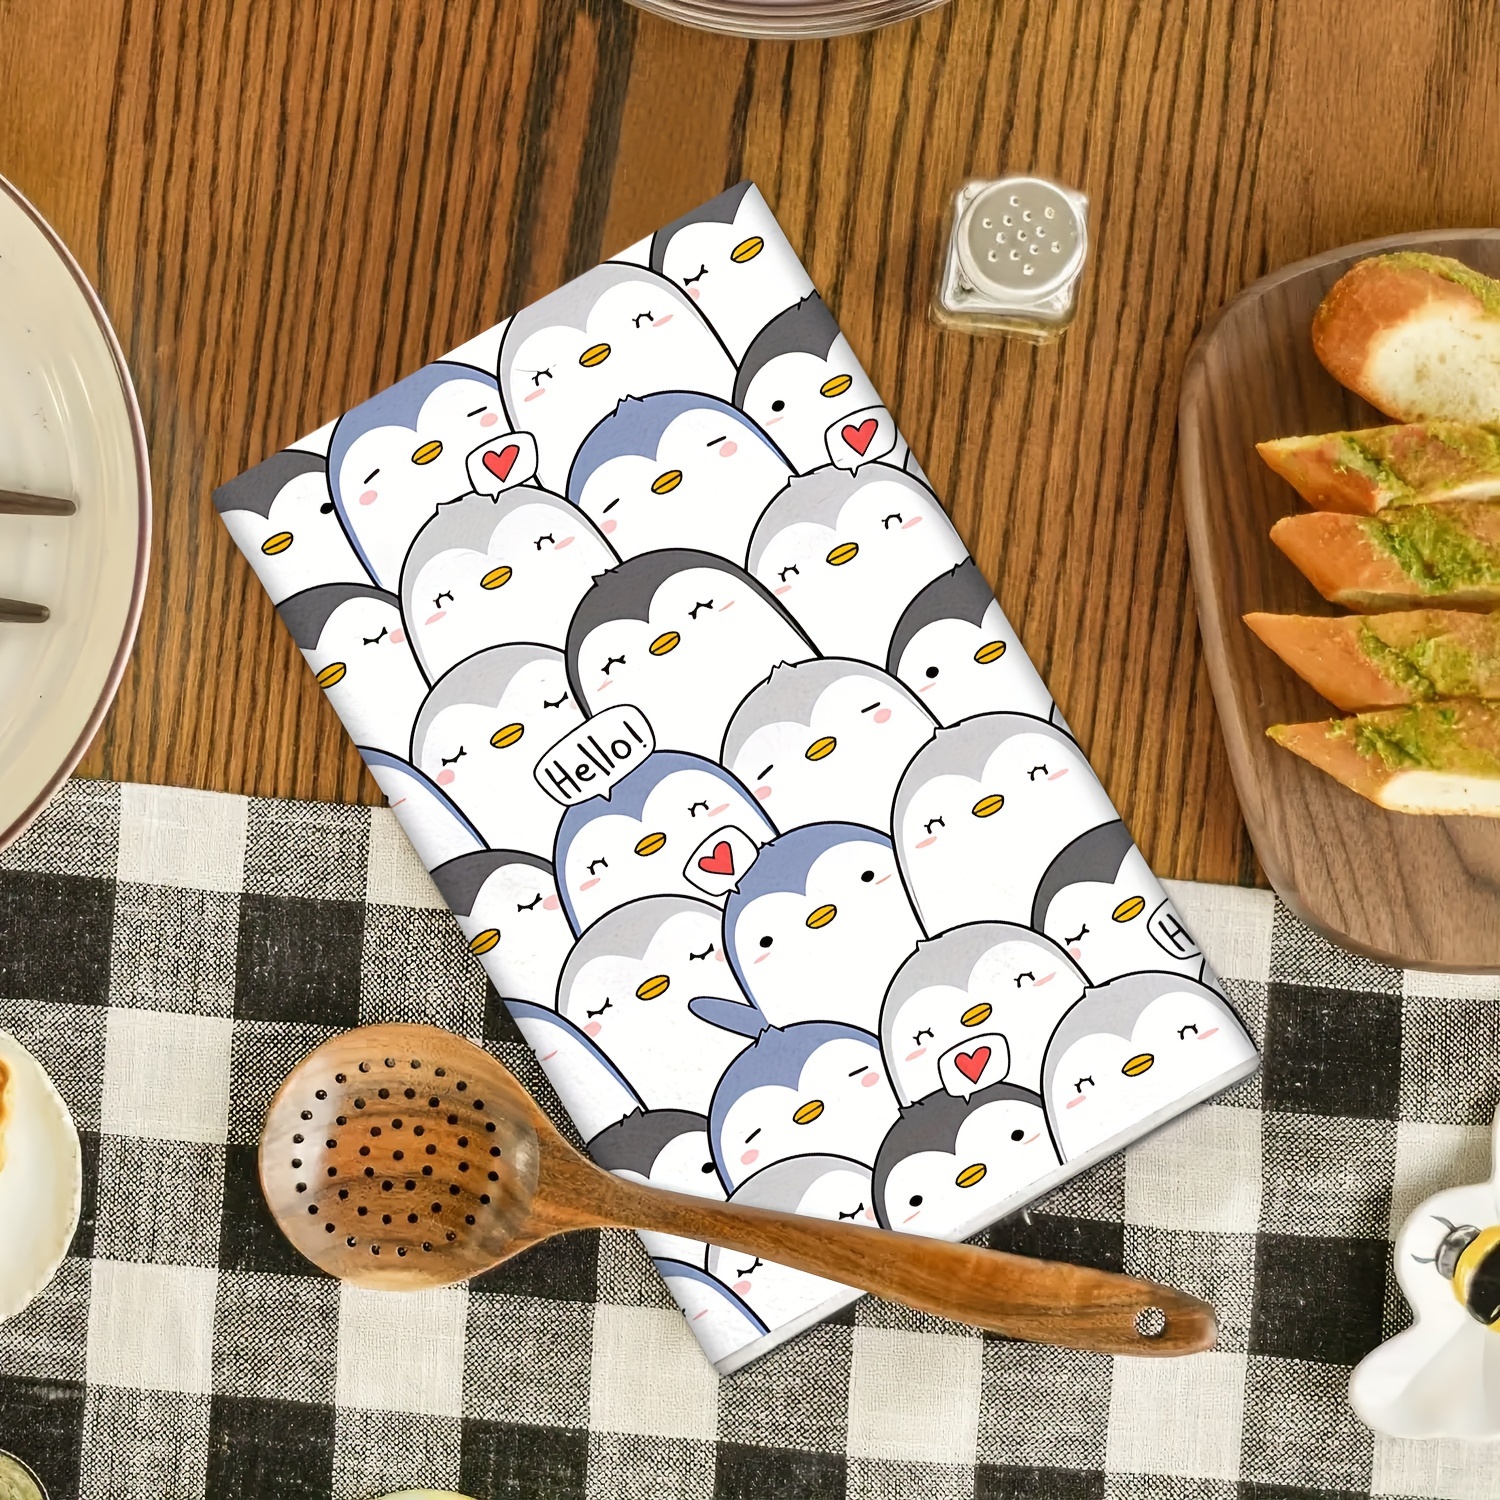 

Contemporary Animal Themed Microfiber Dish Towels - Set Of 2, Ultra Fine Knit Fabric Dish Cloths, Machine Washable Oblong Kitchen Towels With Quality Stitch, Cute Penguin Design